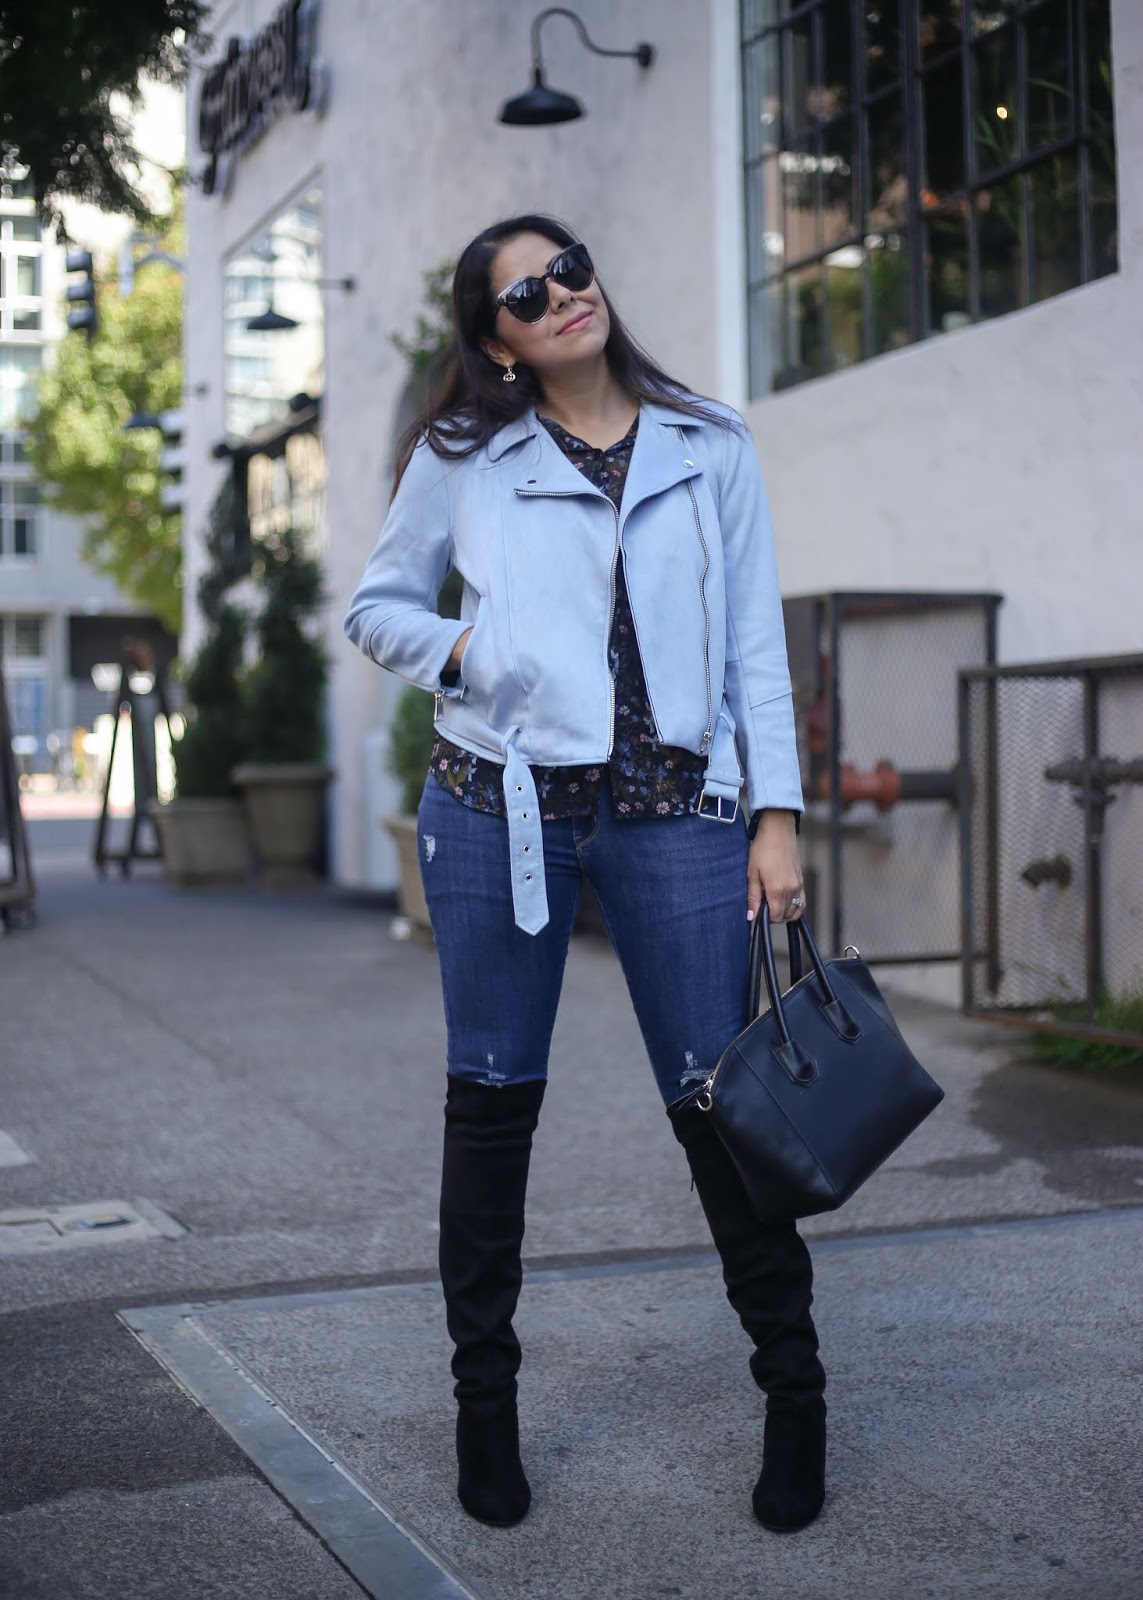 How to wear a suede Moto Jacket - Lil bits of Chic